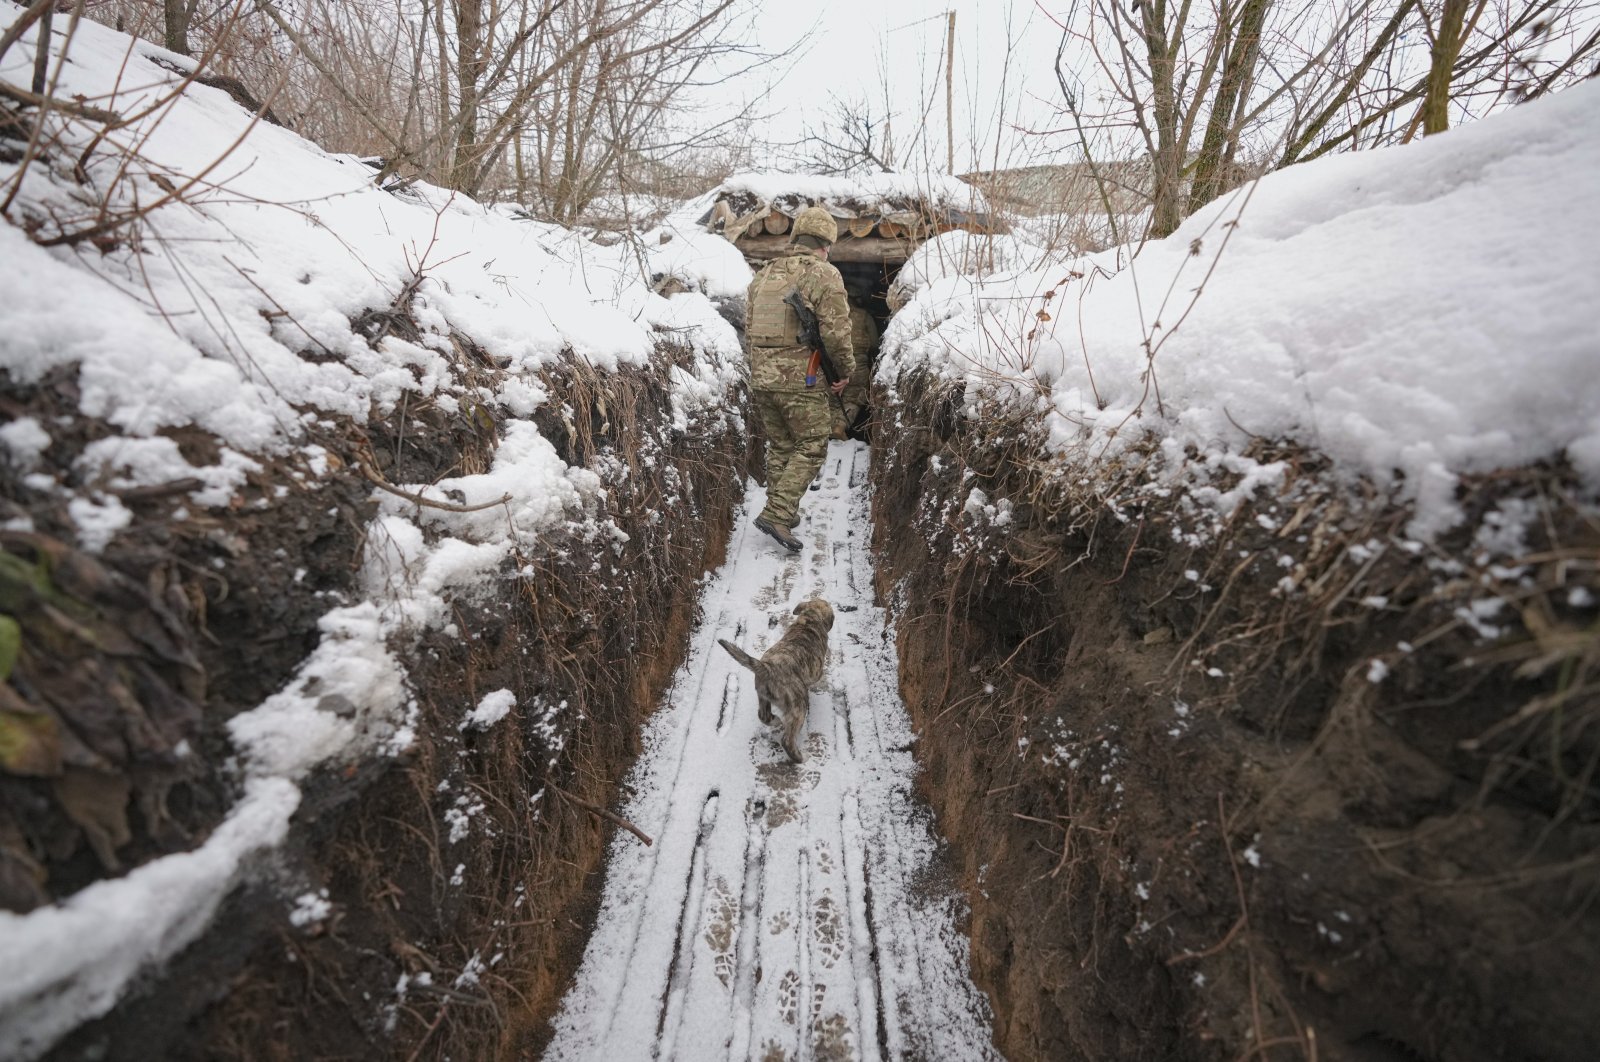 A Ukrainian soldier is followed by a puppy as he walks through a trench at a frontline position in the Luhansk region, eastern Ukraine, Feb. 1, 2022. (AP Photo/Vadim Ghirda)